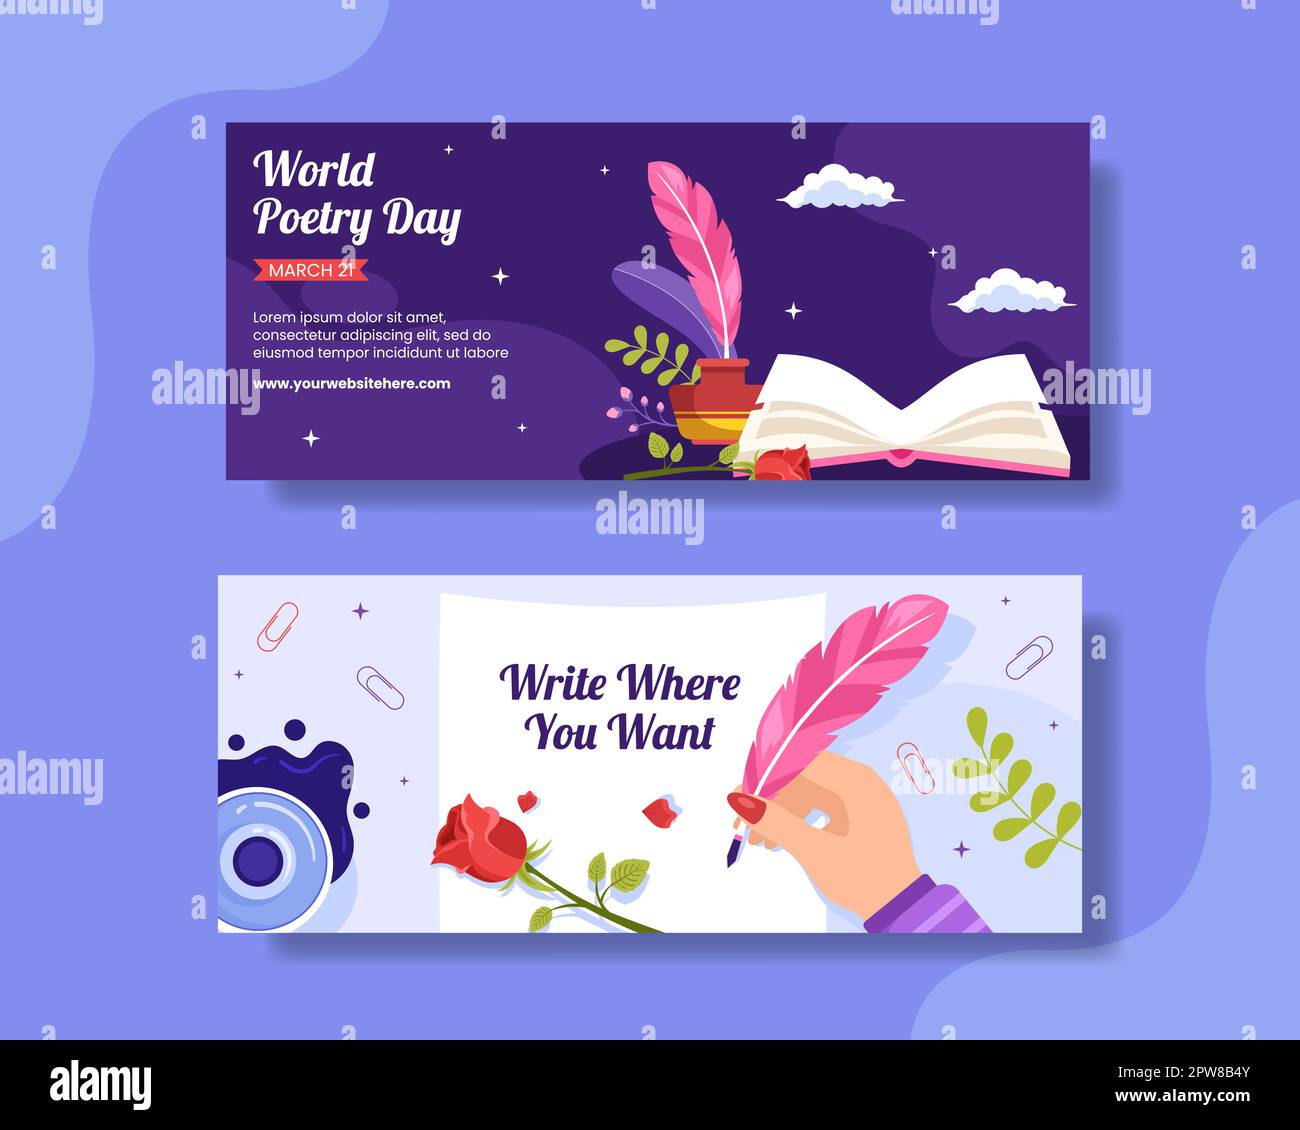 World Poetry Day Horizontal Banner with Paper and Quill Flat Cartoon Hand Drawn Templates Illustration Stock Vector